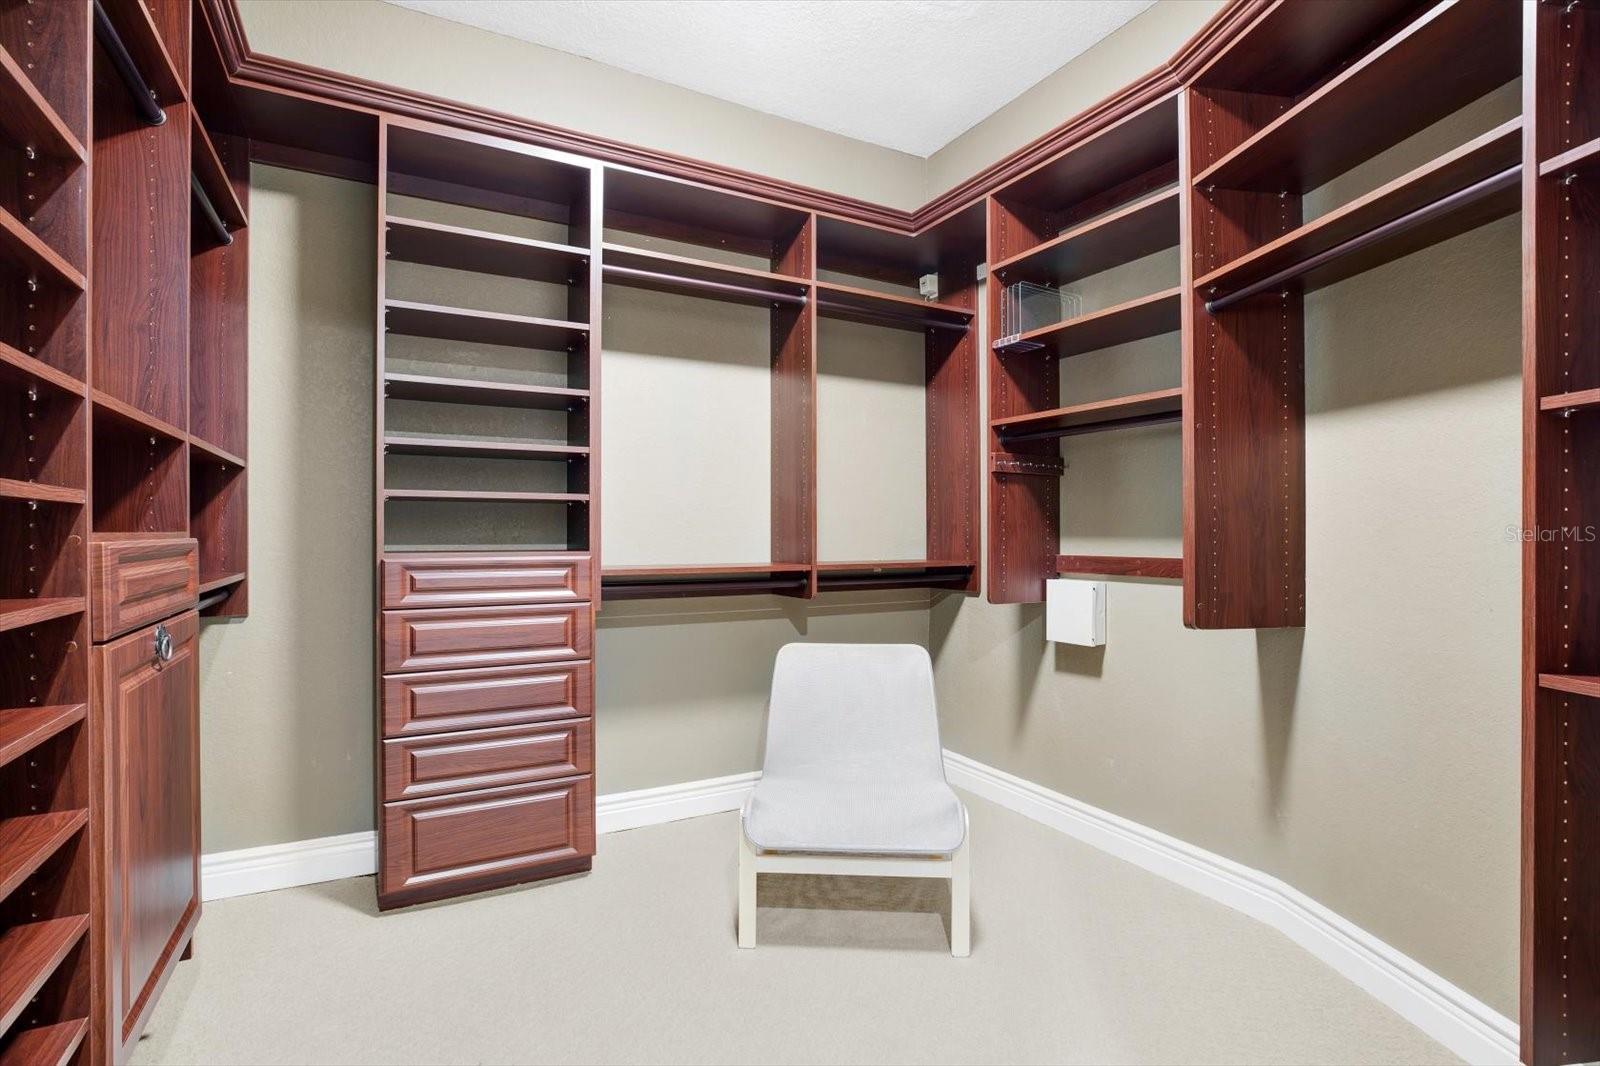 Primary Walk-in Closet with Built-ins